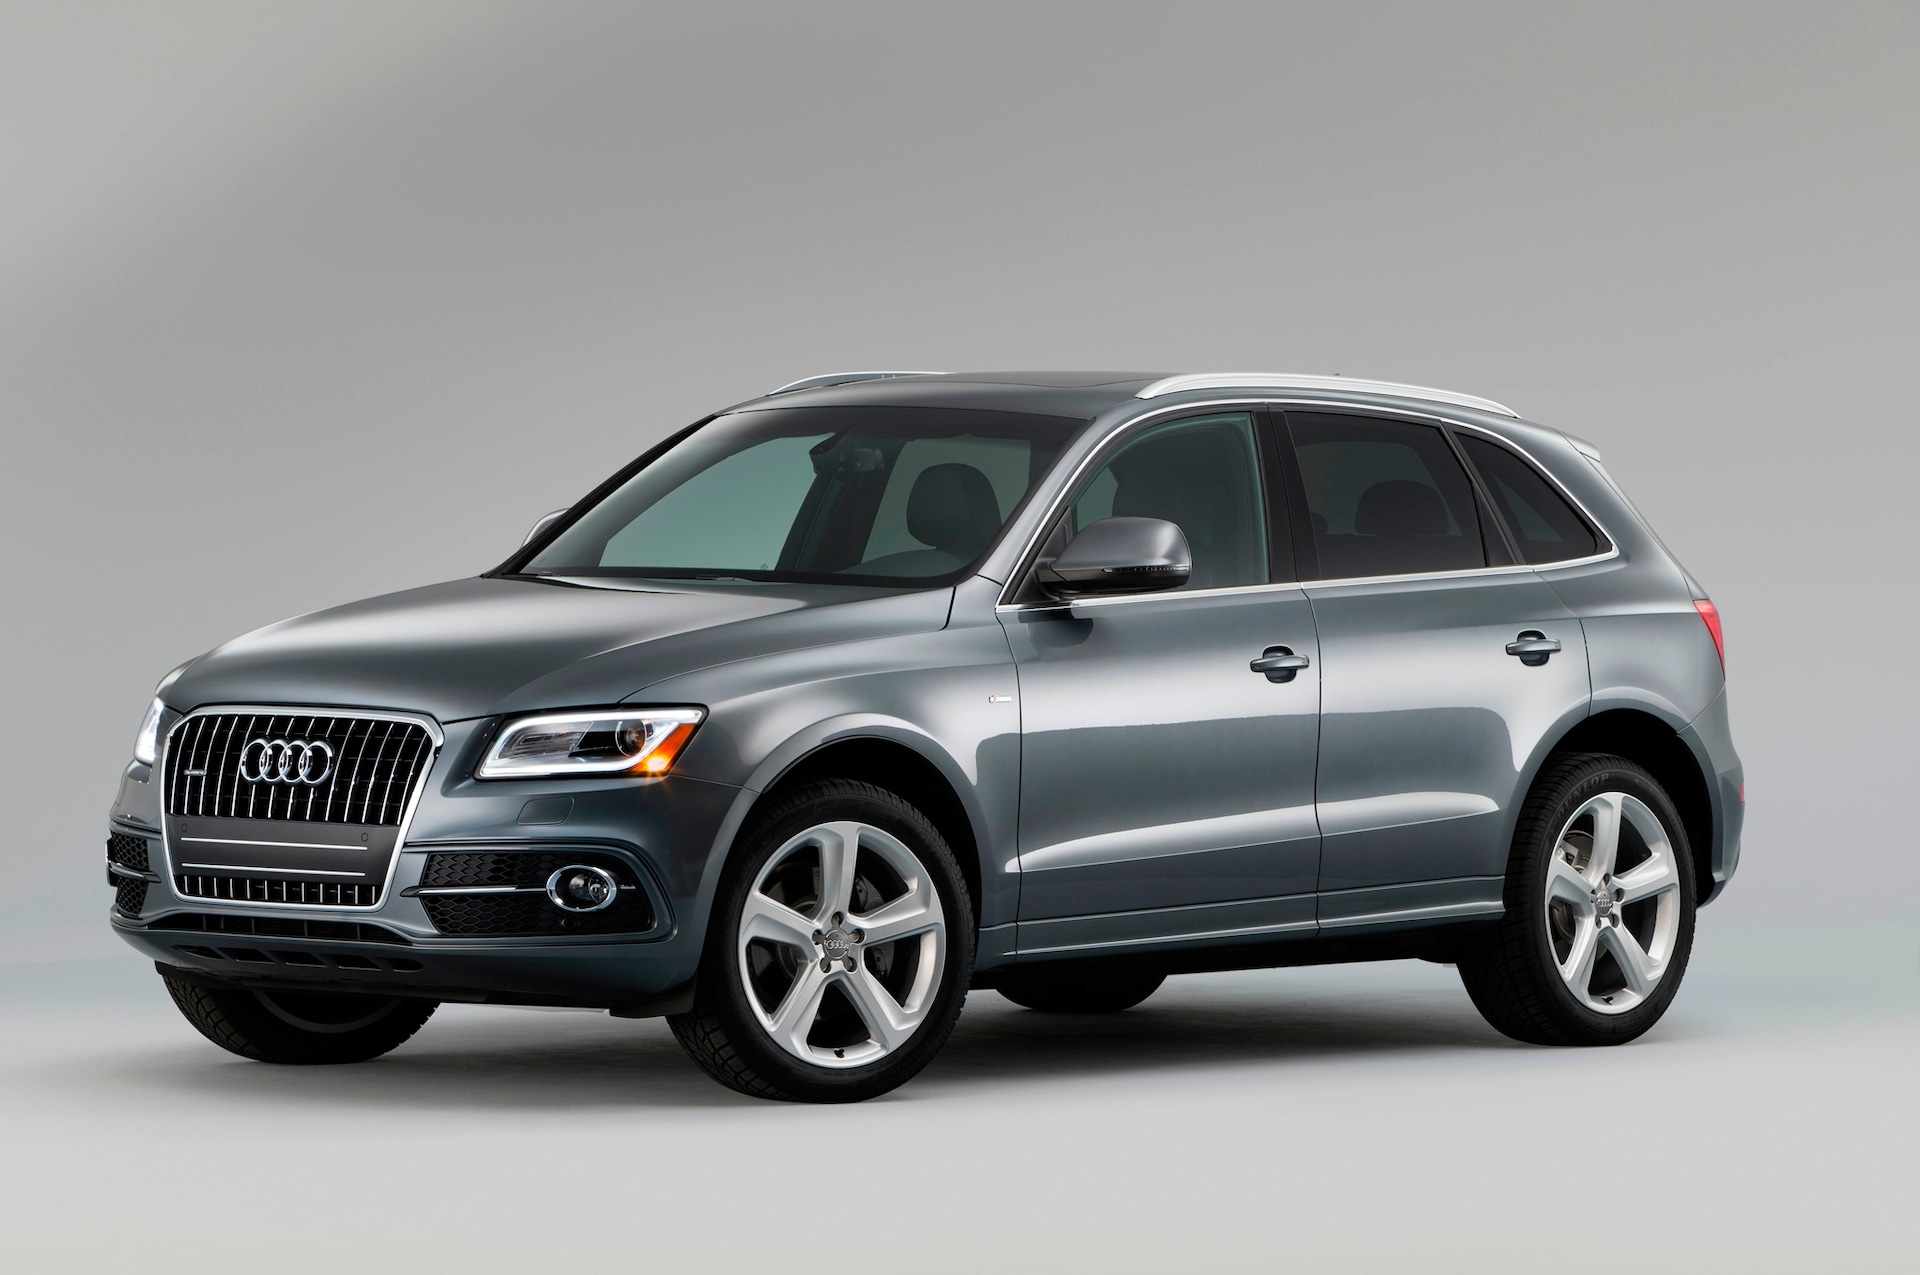 2015 Audi Q5 Crossover Earns Top Safety Pick + Award